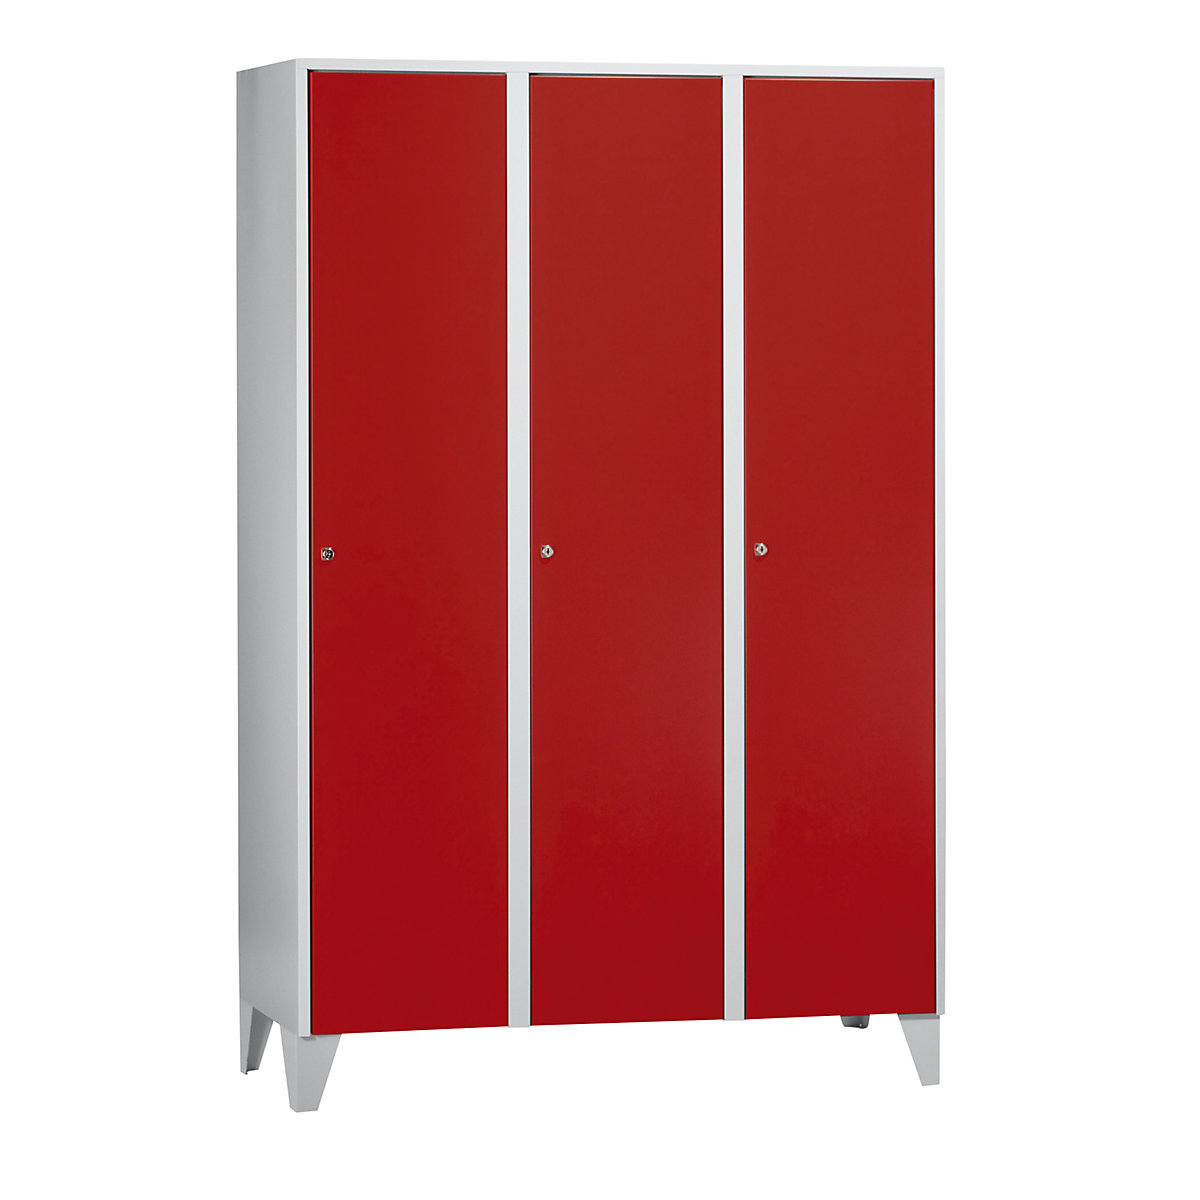 Cloakroom locker with feet – Wolf, HxWxD 1850 x 1200 x 500 mm, 3 compartments, flame red-7